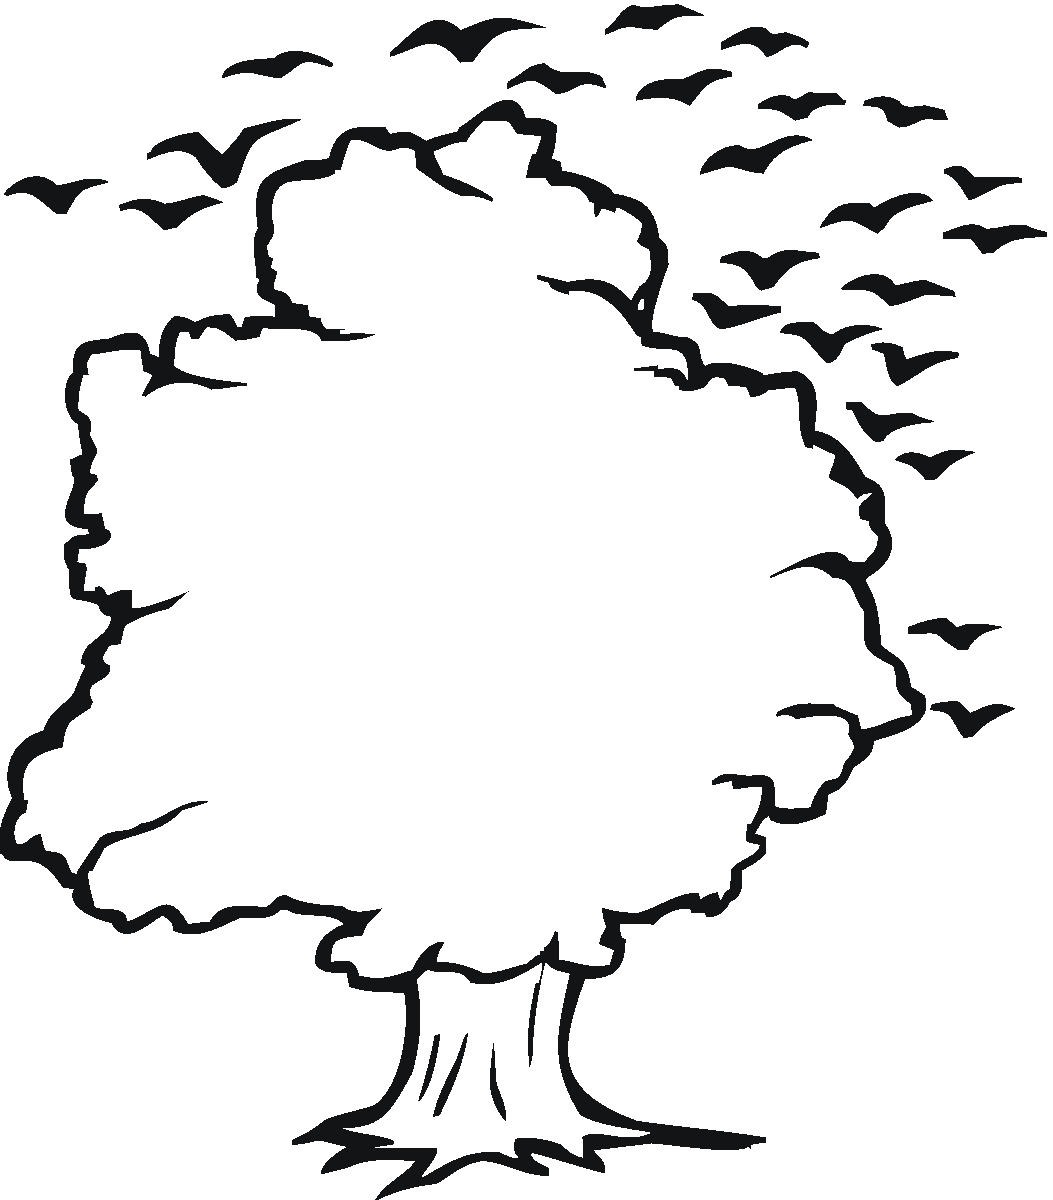 Outline Of A Tree - ClipArt Best